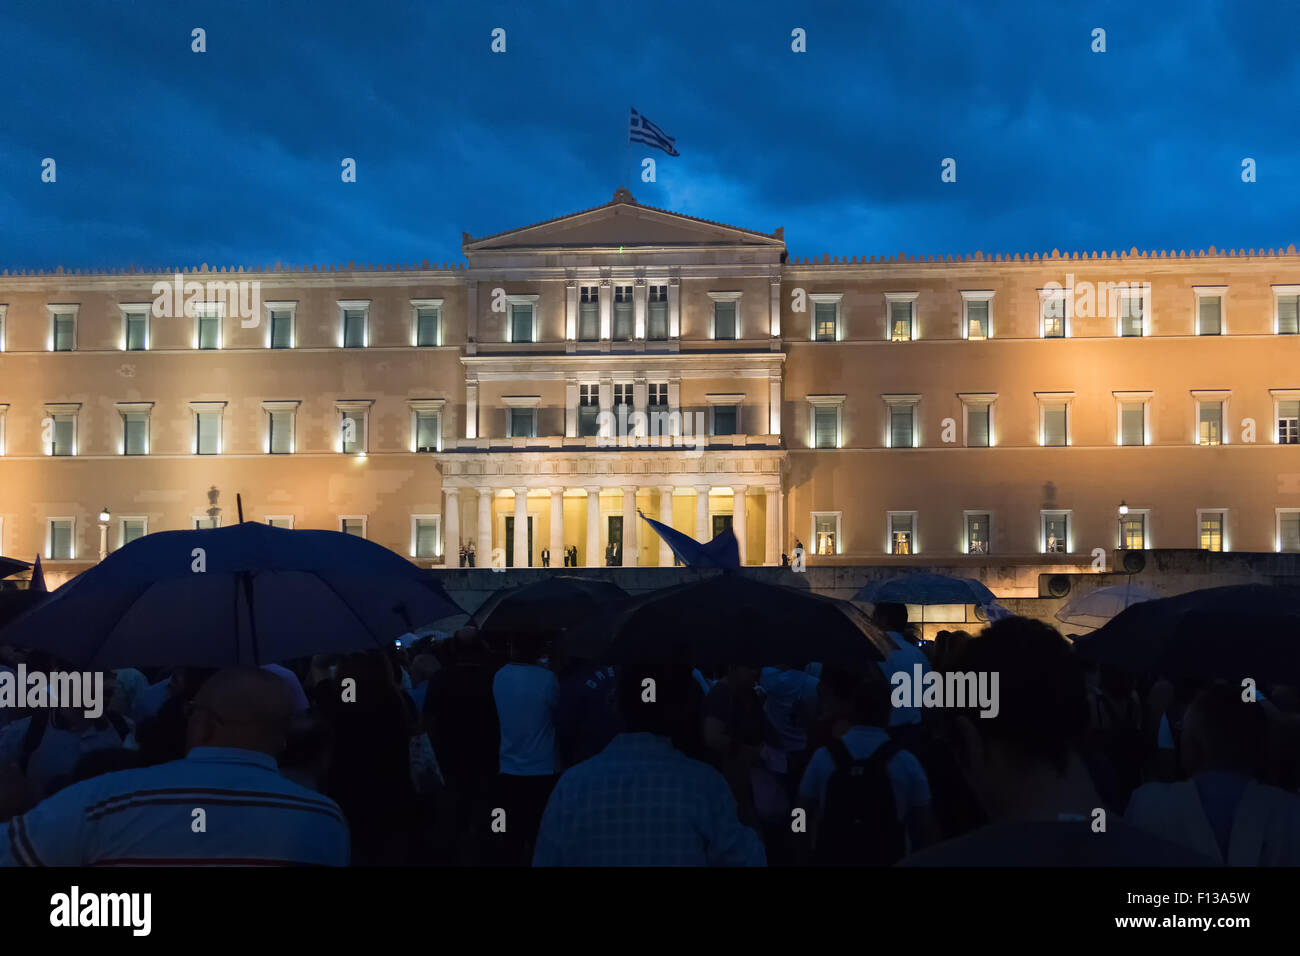 Athens, Greece, 30 June 2015. Greek people demonstrated against the government about the upcoming referendum. Stock Photo